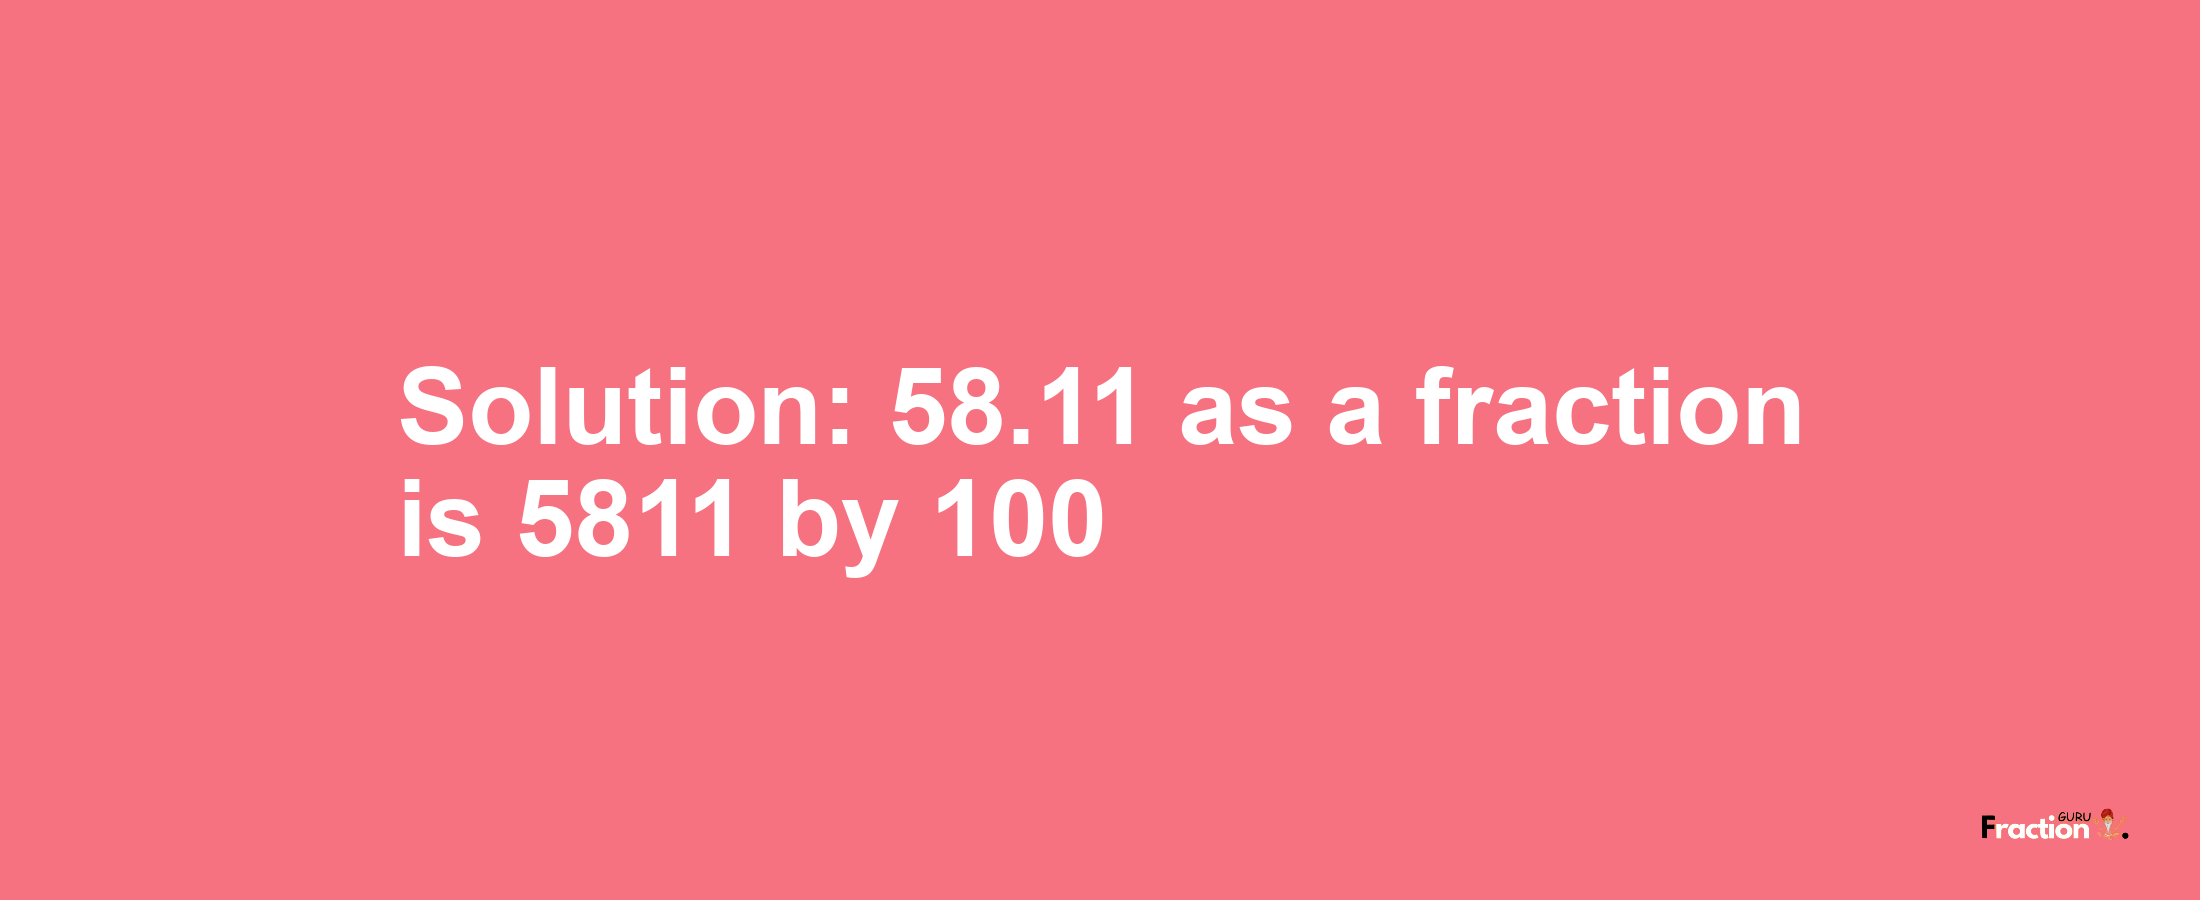 Solution:58.11 as a fraction is 5811/100